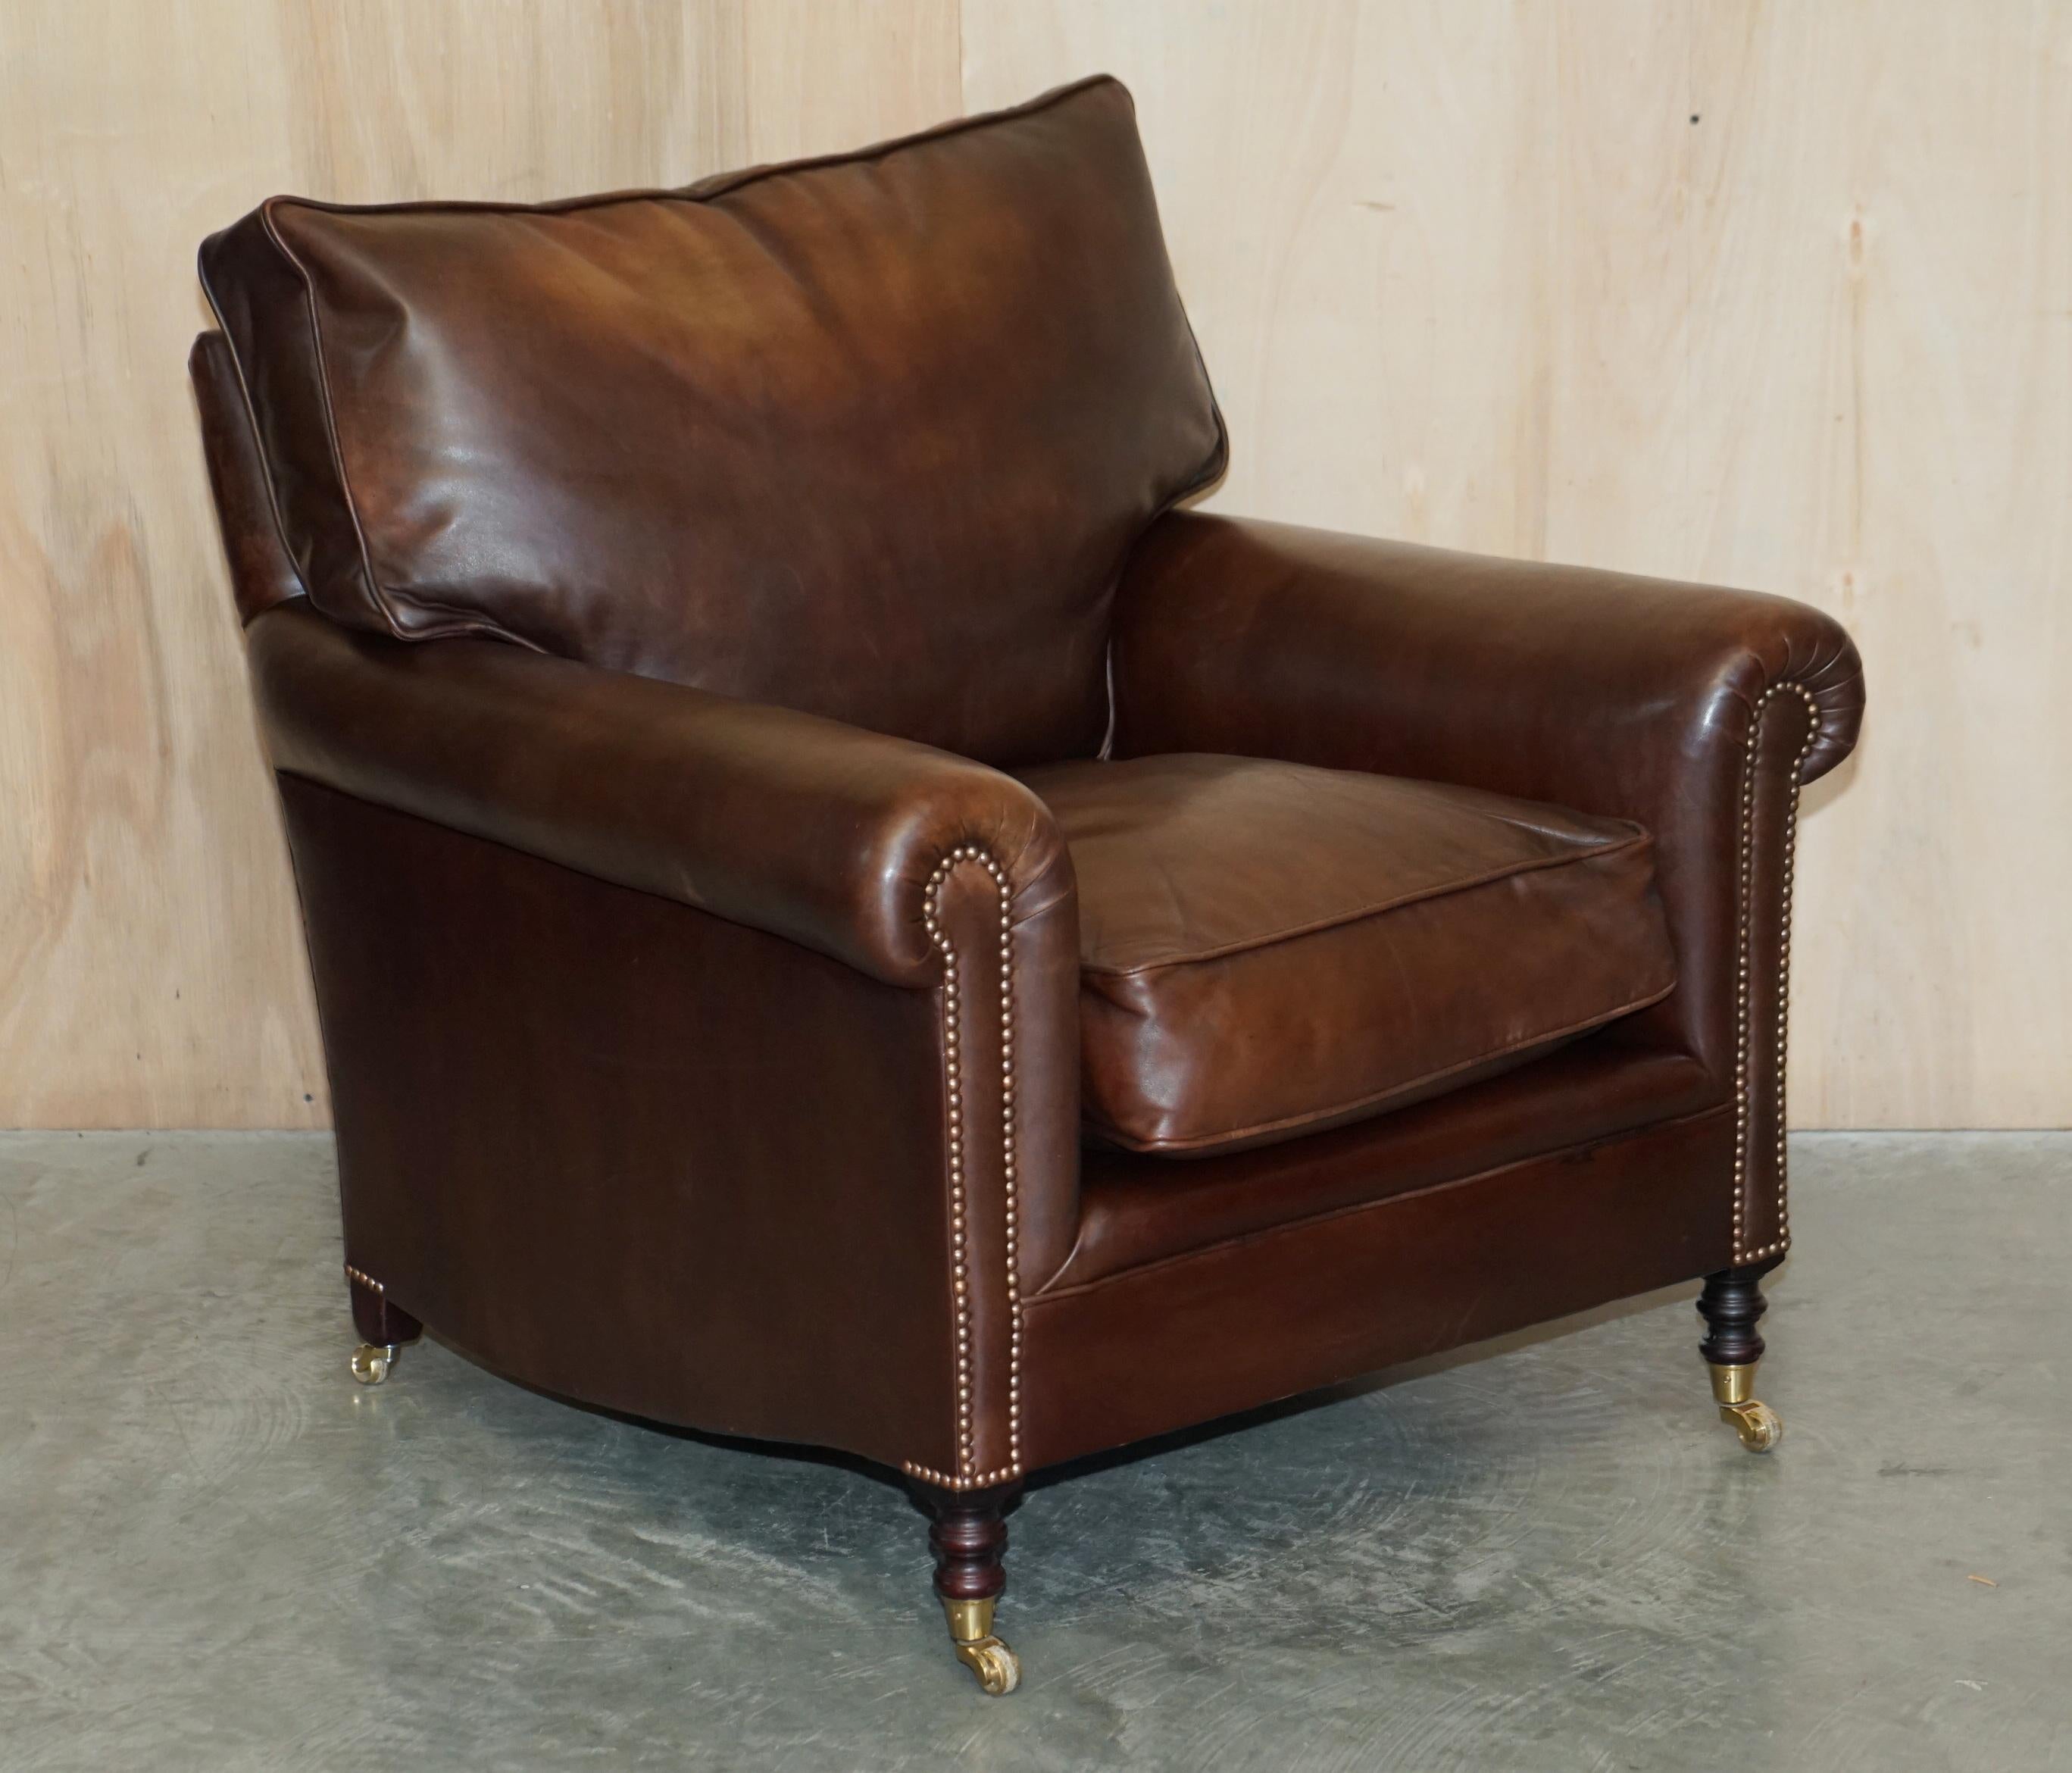 We are delighted to offer for sale this absolutely stunning, hand dyed saddle brown leather George Smith Chelsea, Signature full scroll arm armchair with matching run up large ottoman, both with feather filled cushions

A very well made,